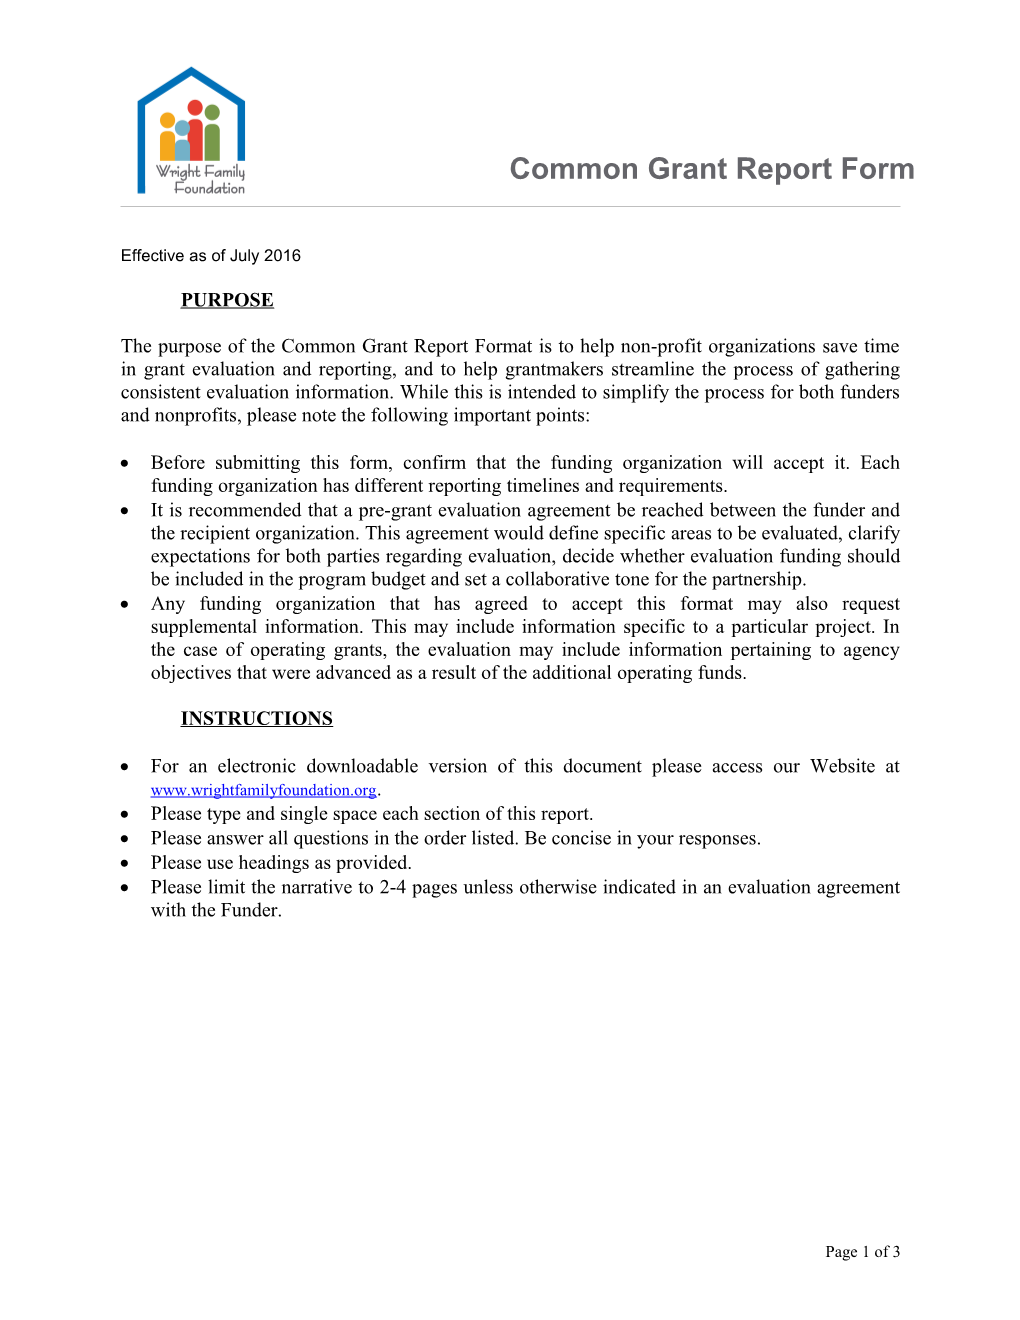 The Purpose of the Common Grant Report Format Is to Help Non-Profit Organizations Save